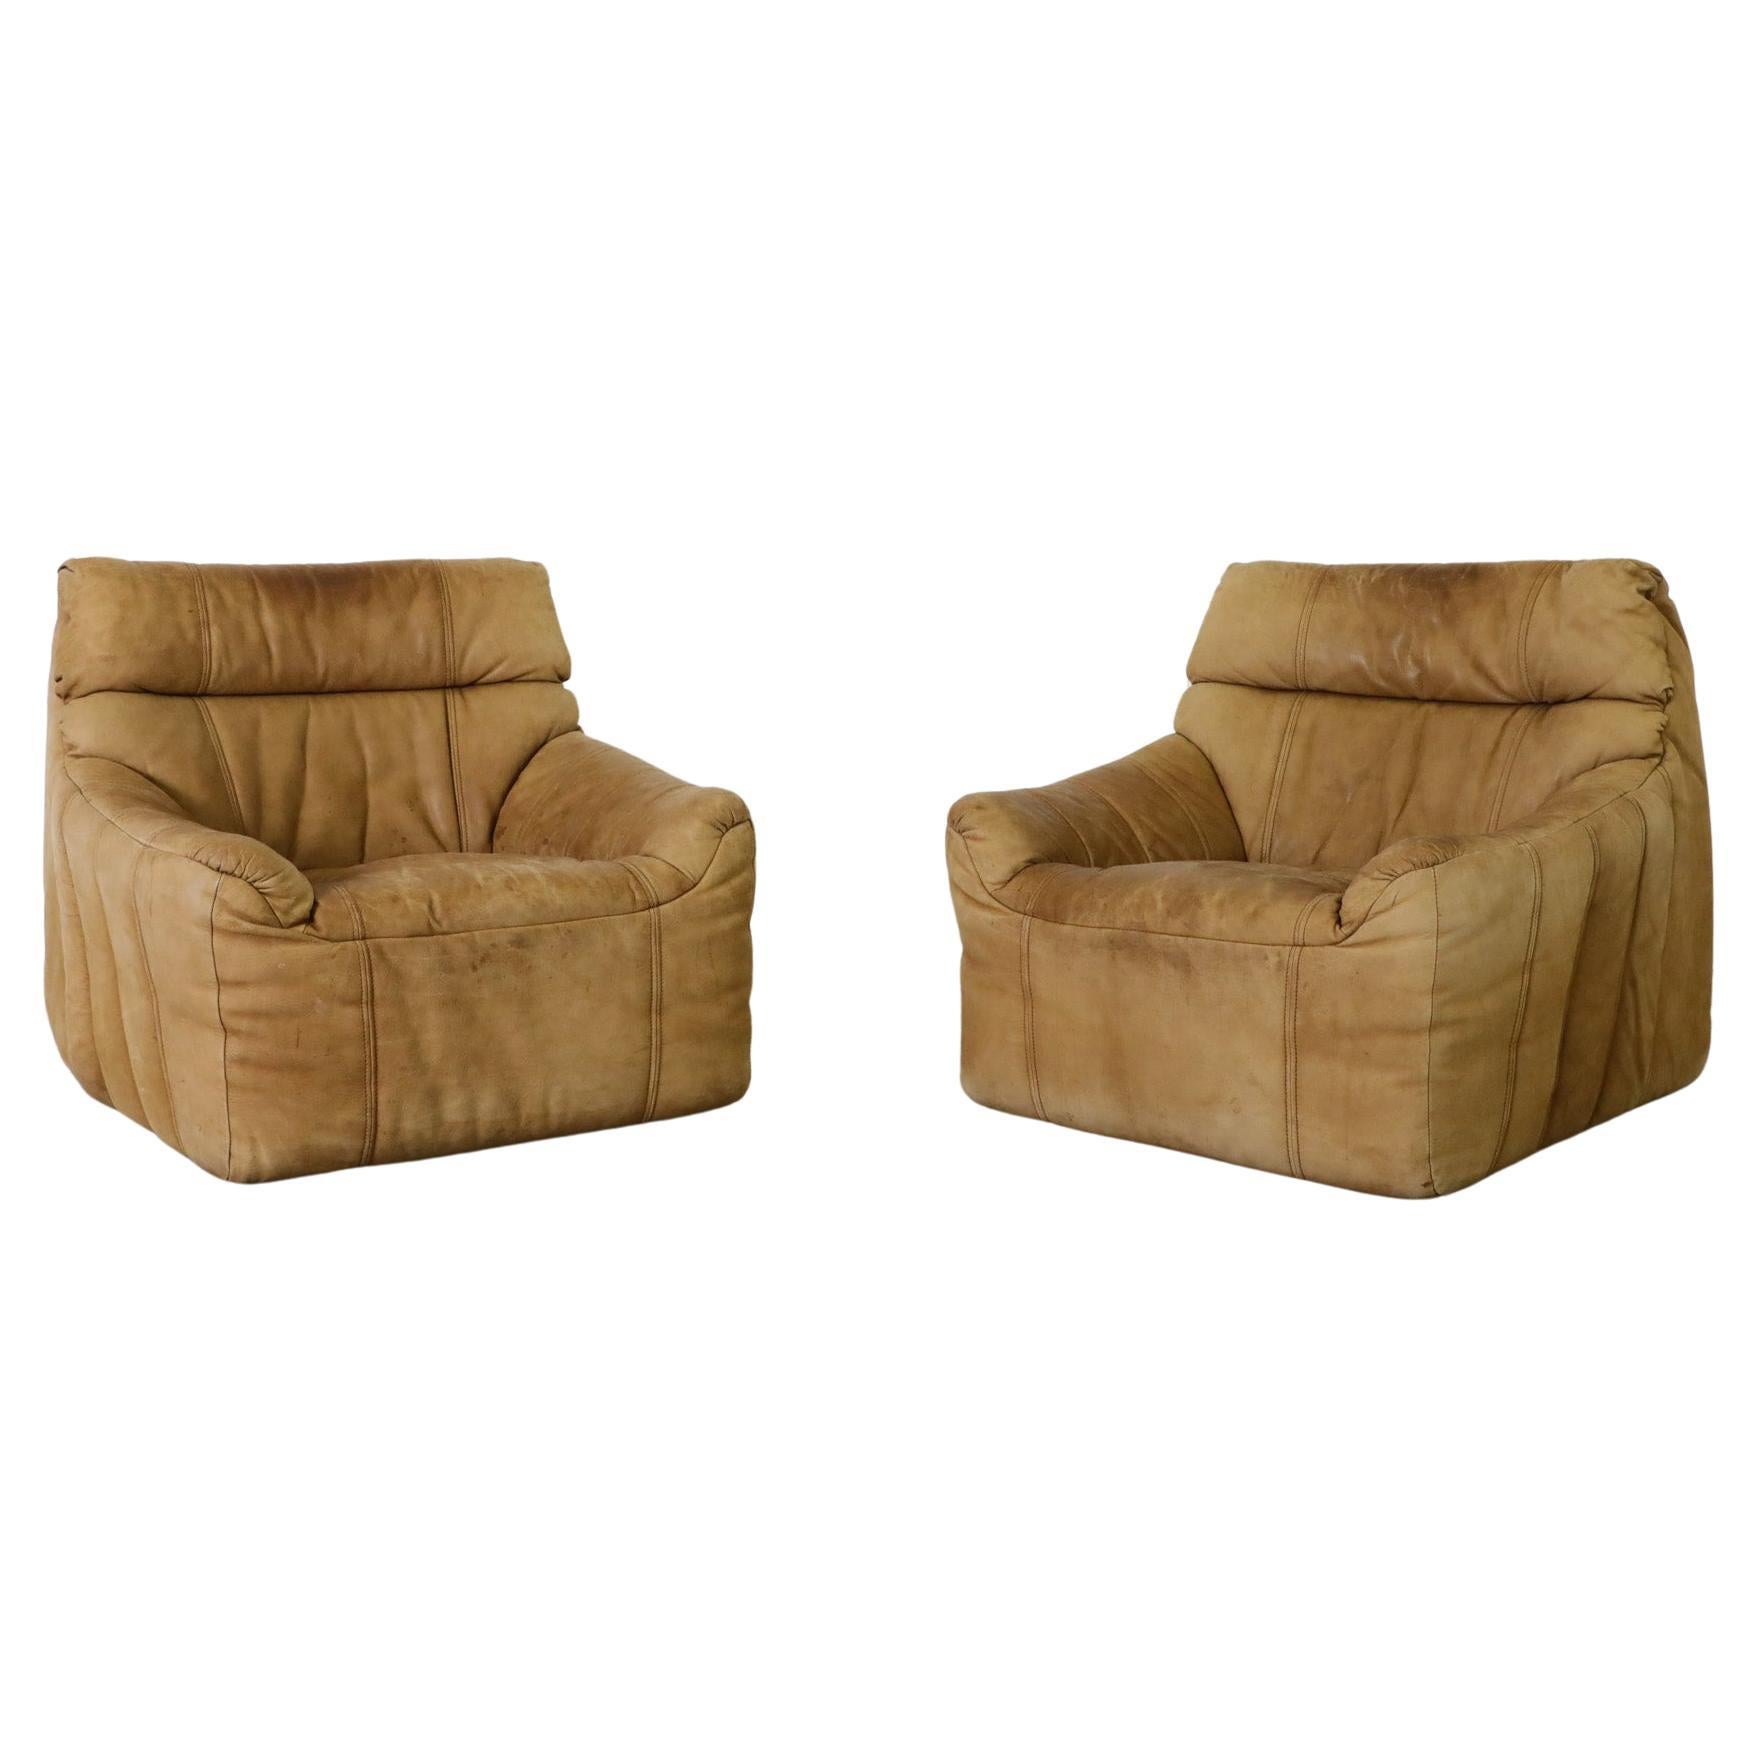 Pair of 1970s Rolf Benz Buck Leather Lounge Chairs For Sale